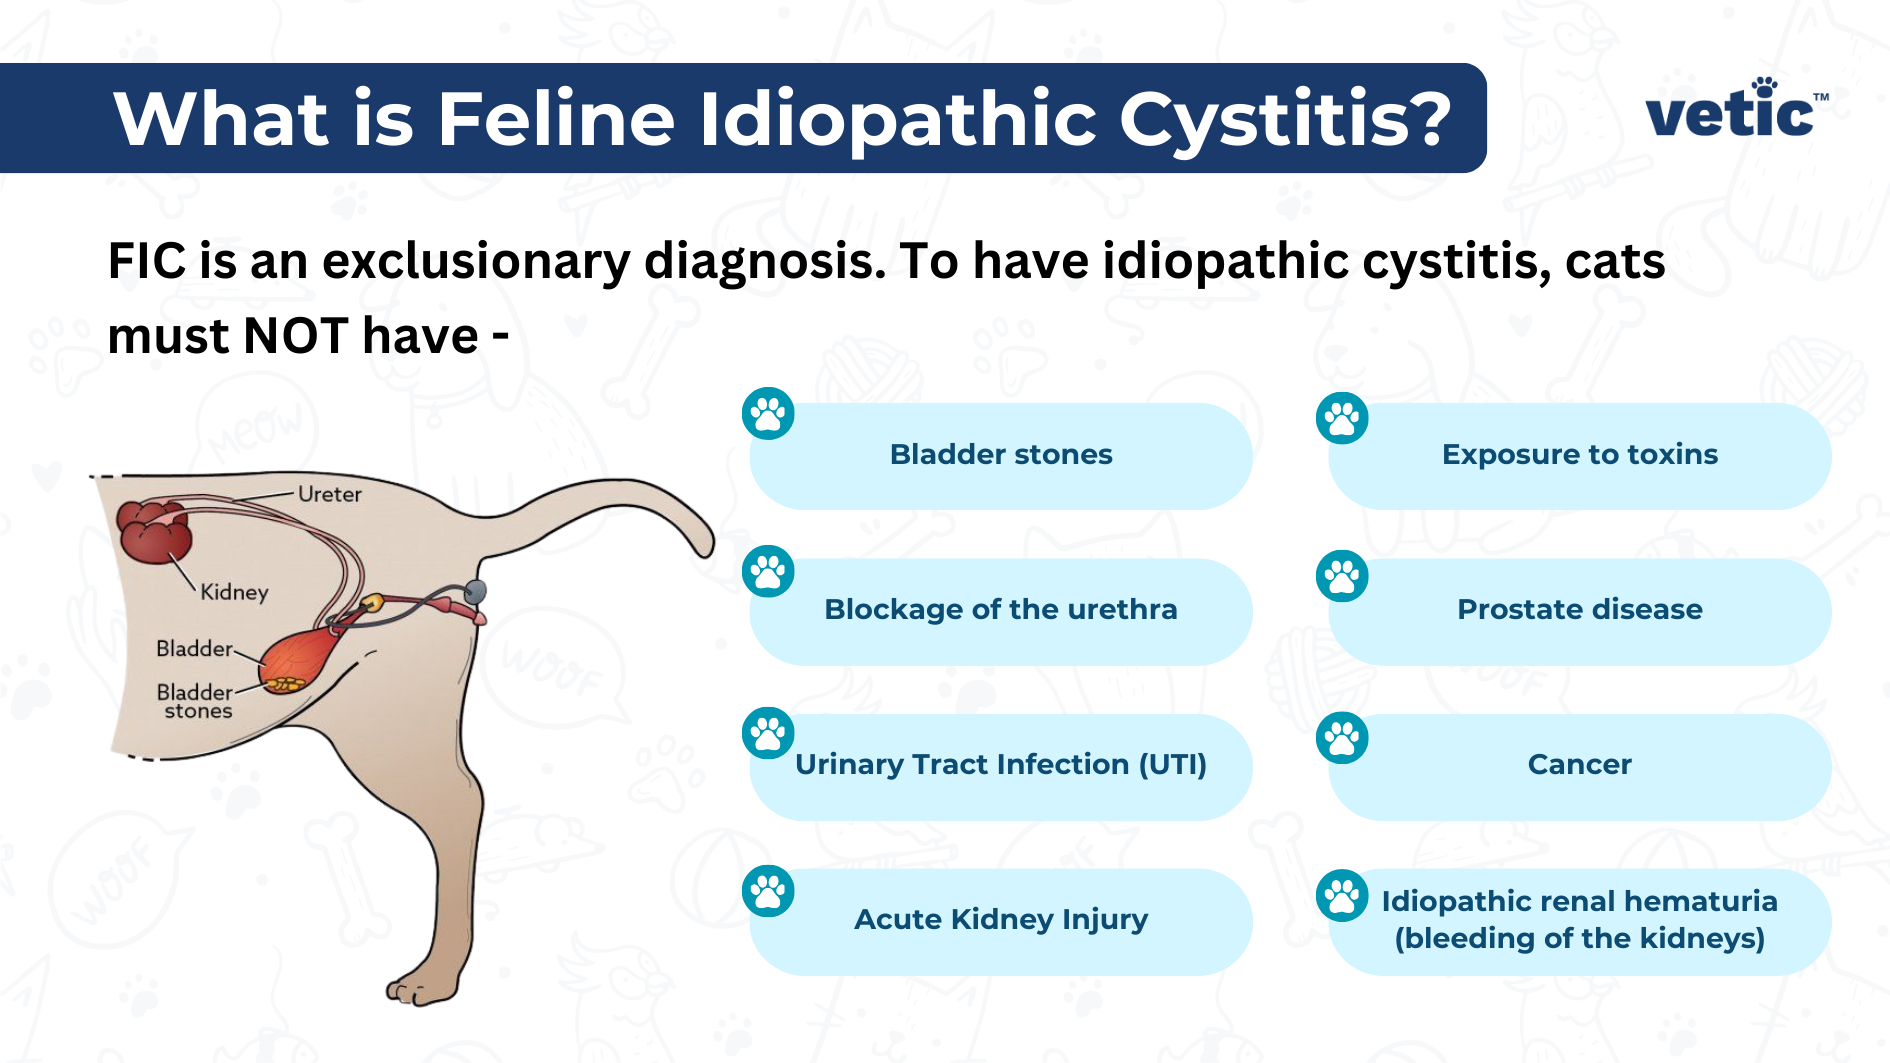 What is feline idiopathic cystitis?FIC is an exclusionary diagnosis. To have idiopathic cystitis, cats must NOT have - Bladder stones Blockage of the urethra Urinary Tract Infection (UTI) Acute Kidney Injury Exposure to toxins Prostate disease Cancer Idiopathic renal hematuria (bleeding of the kidneys)